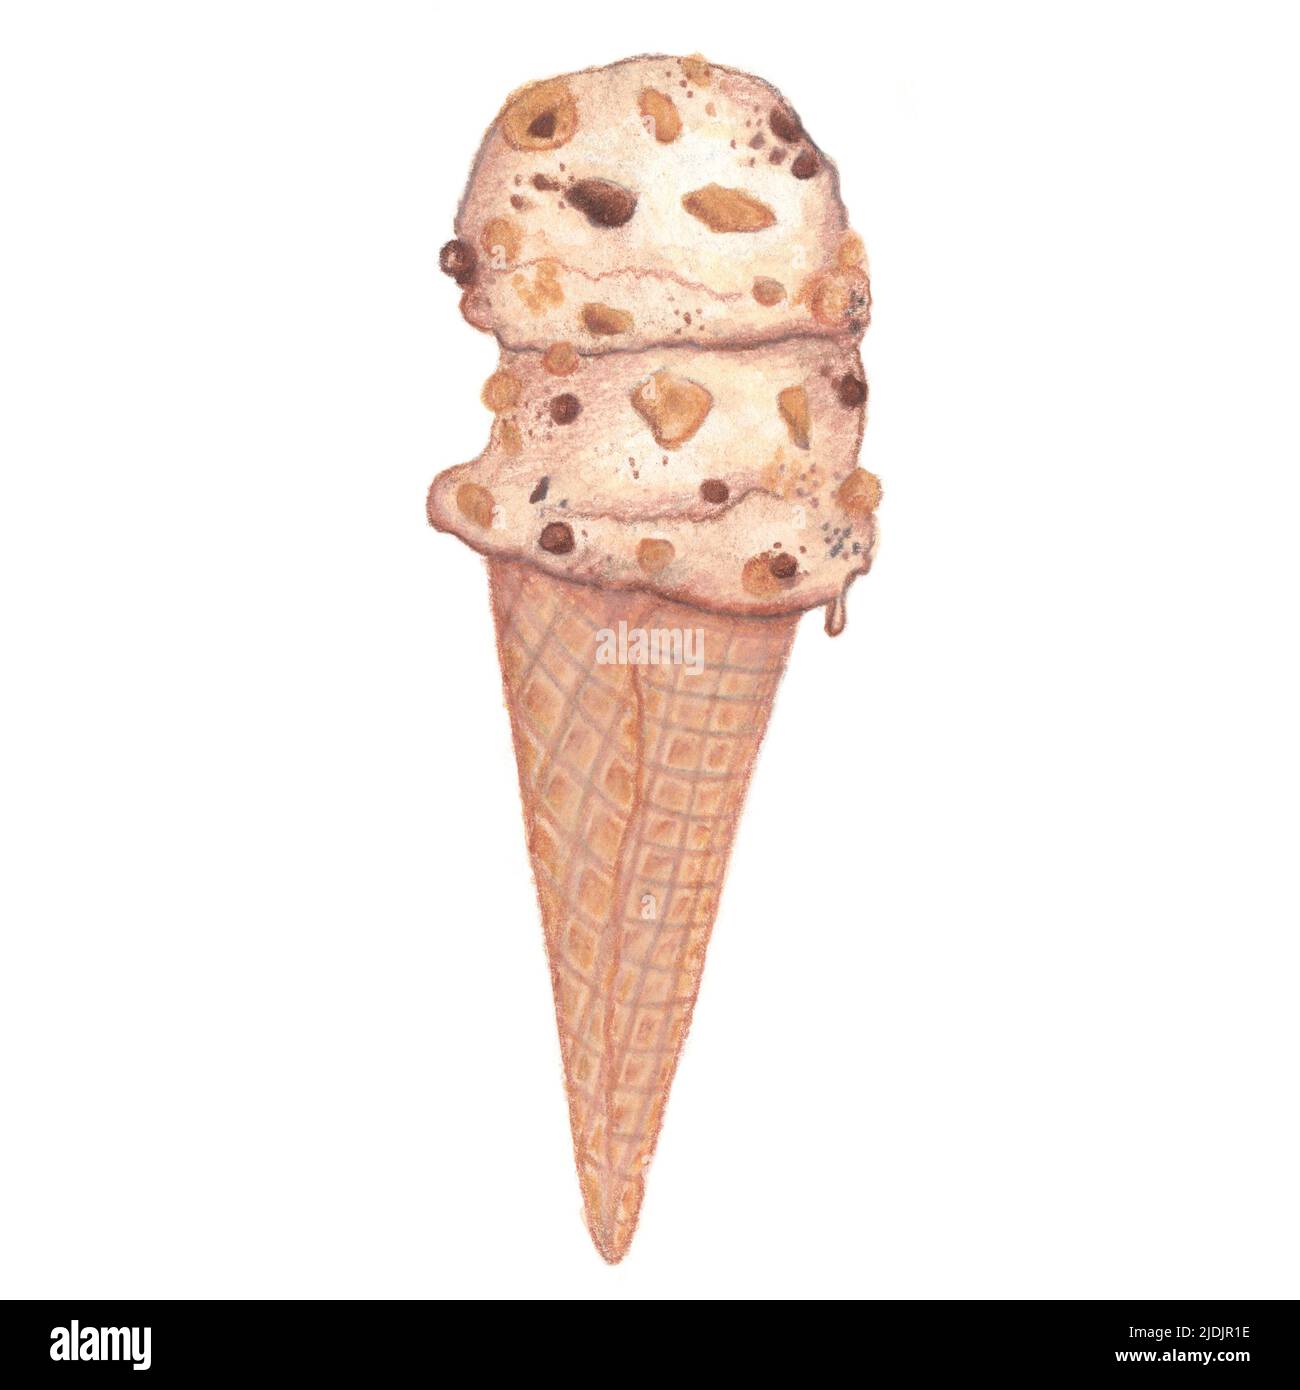 Ice cream cone illustration on white background. Watercolor hand-drawn clipart illustration. Great for cards, menus, parties, decorations. Stock Photo